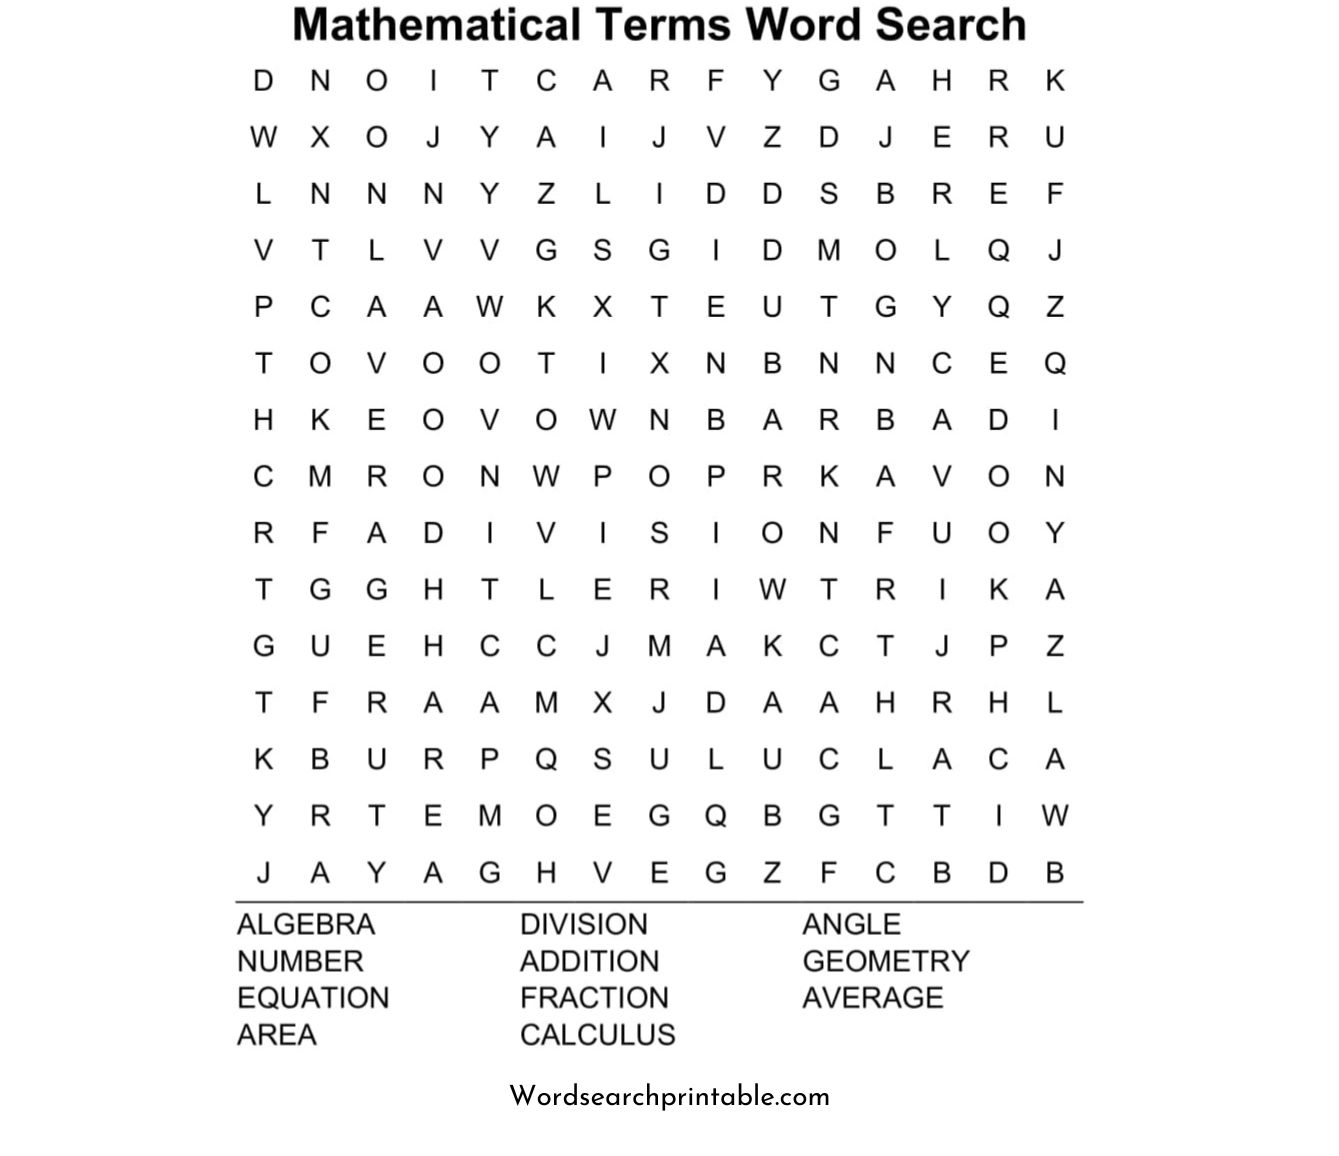 mathematical terms word search puzzle solution